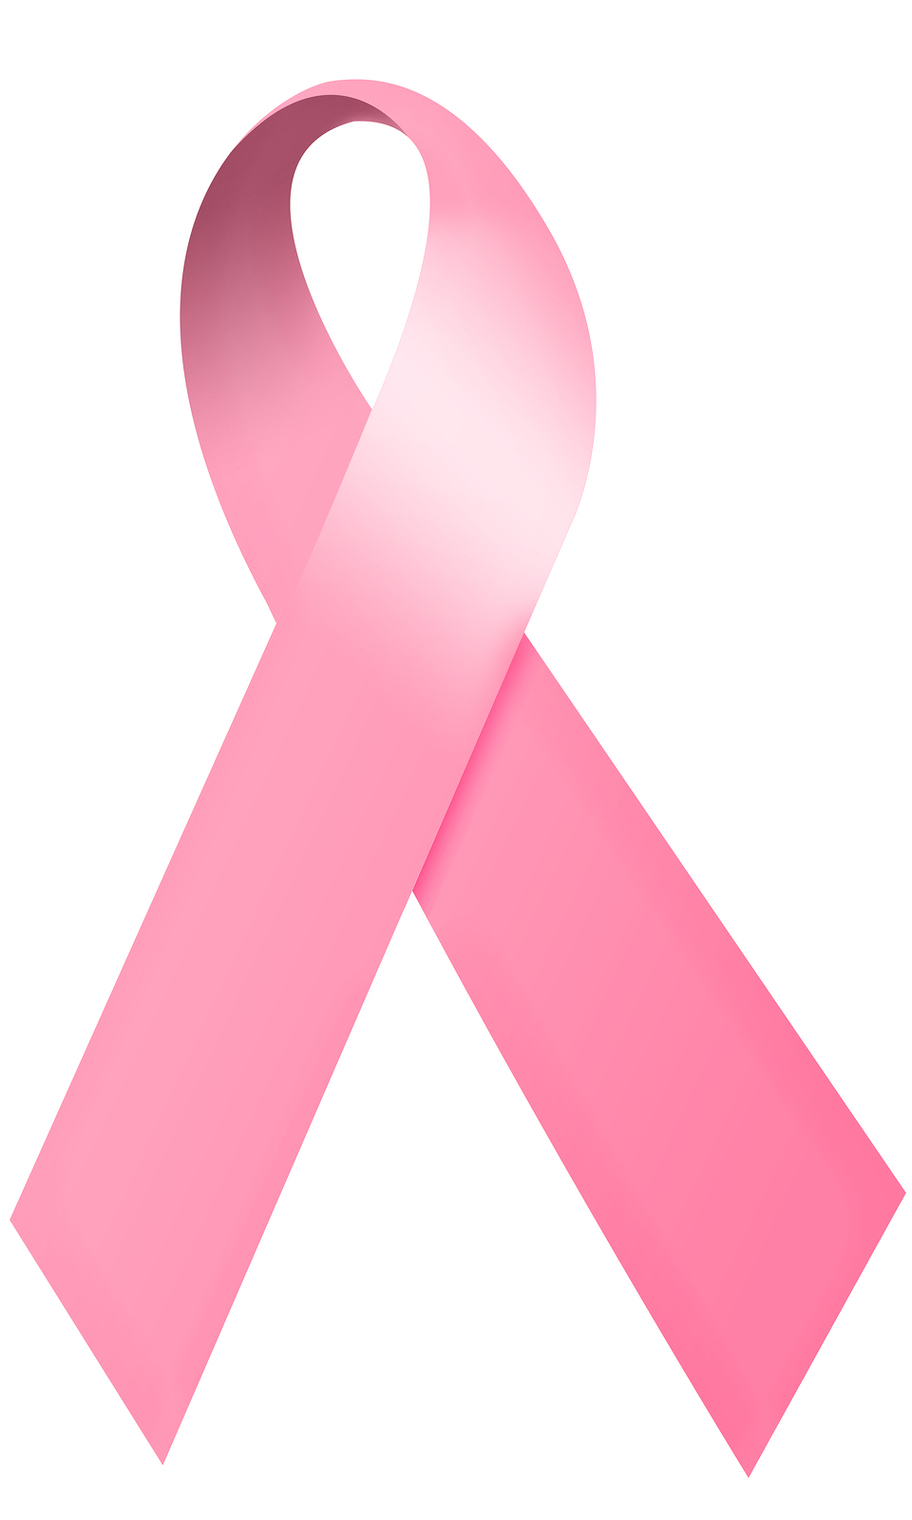 Cancer Ribbon Vector Free Download Clipart - Free to use Clip Art ...